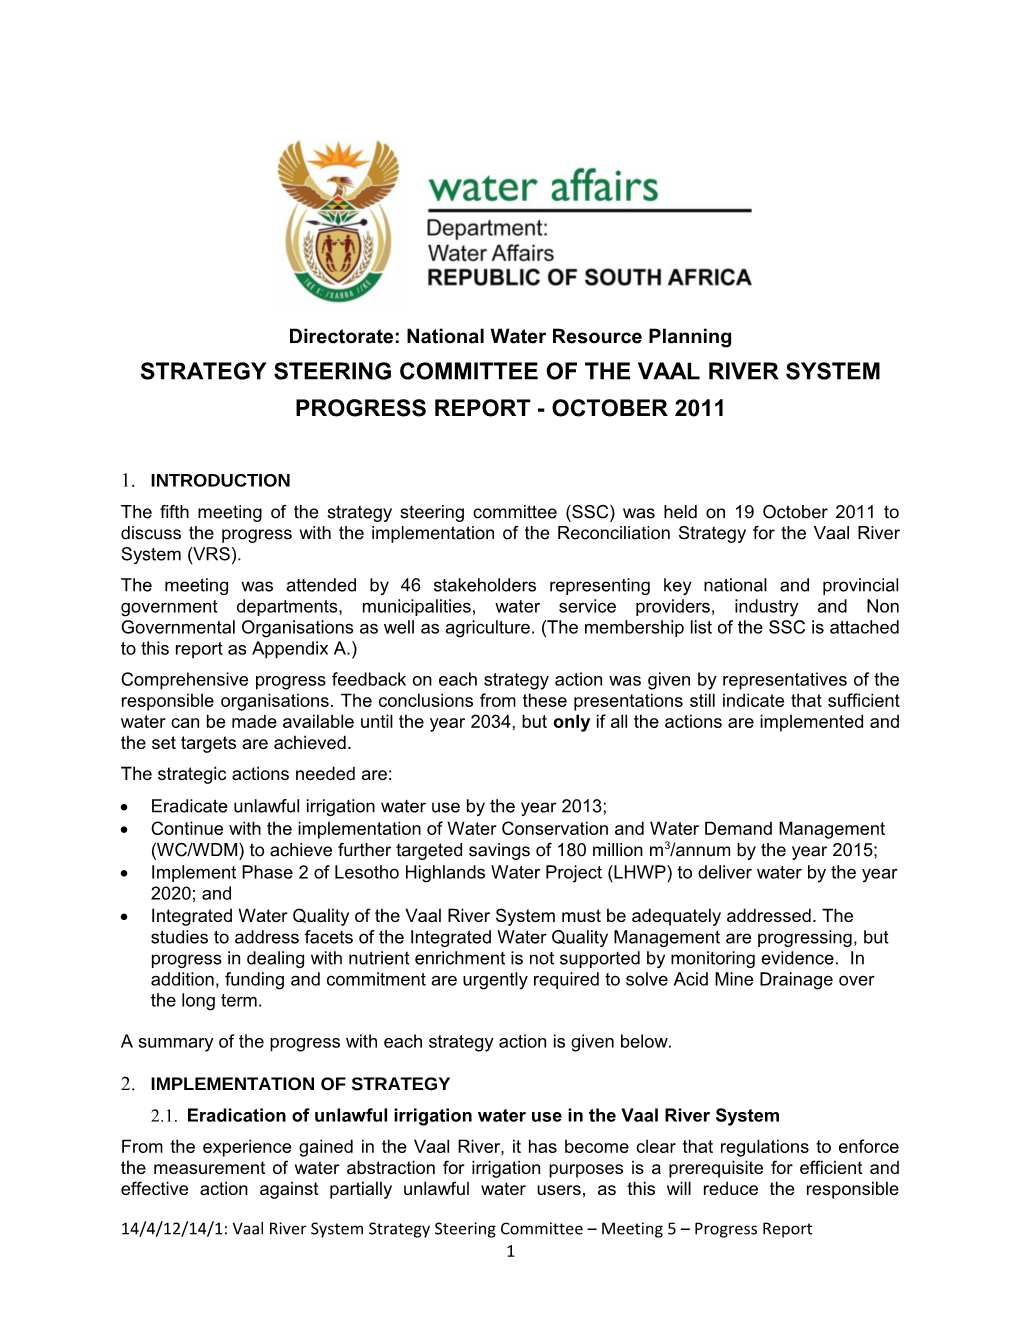 Strategy Steering Committee of the Vaal River System